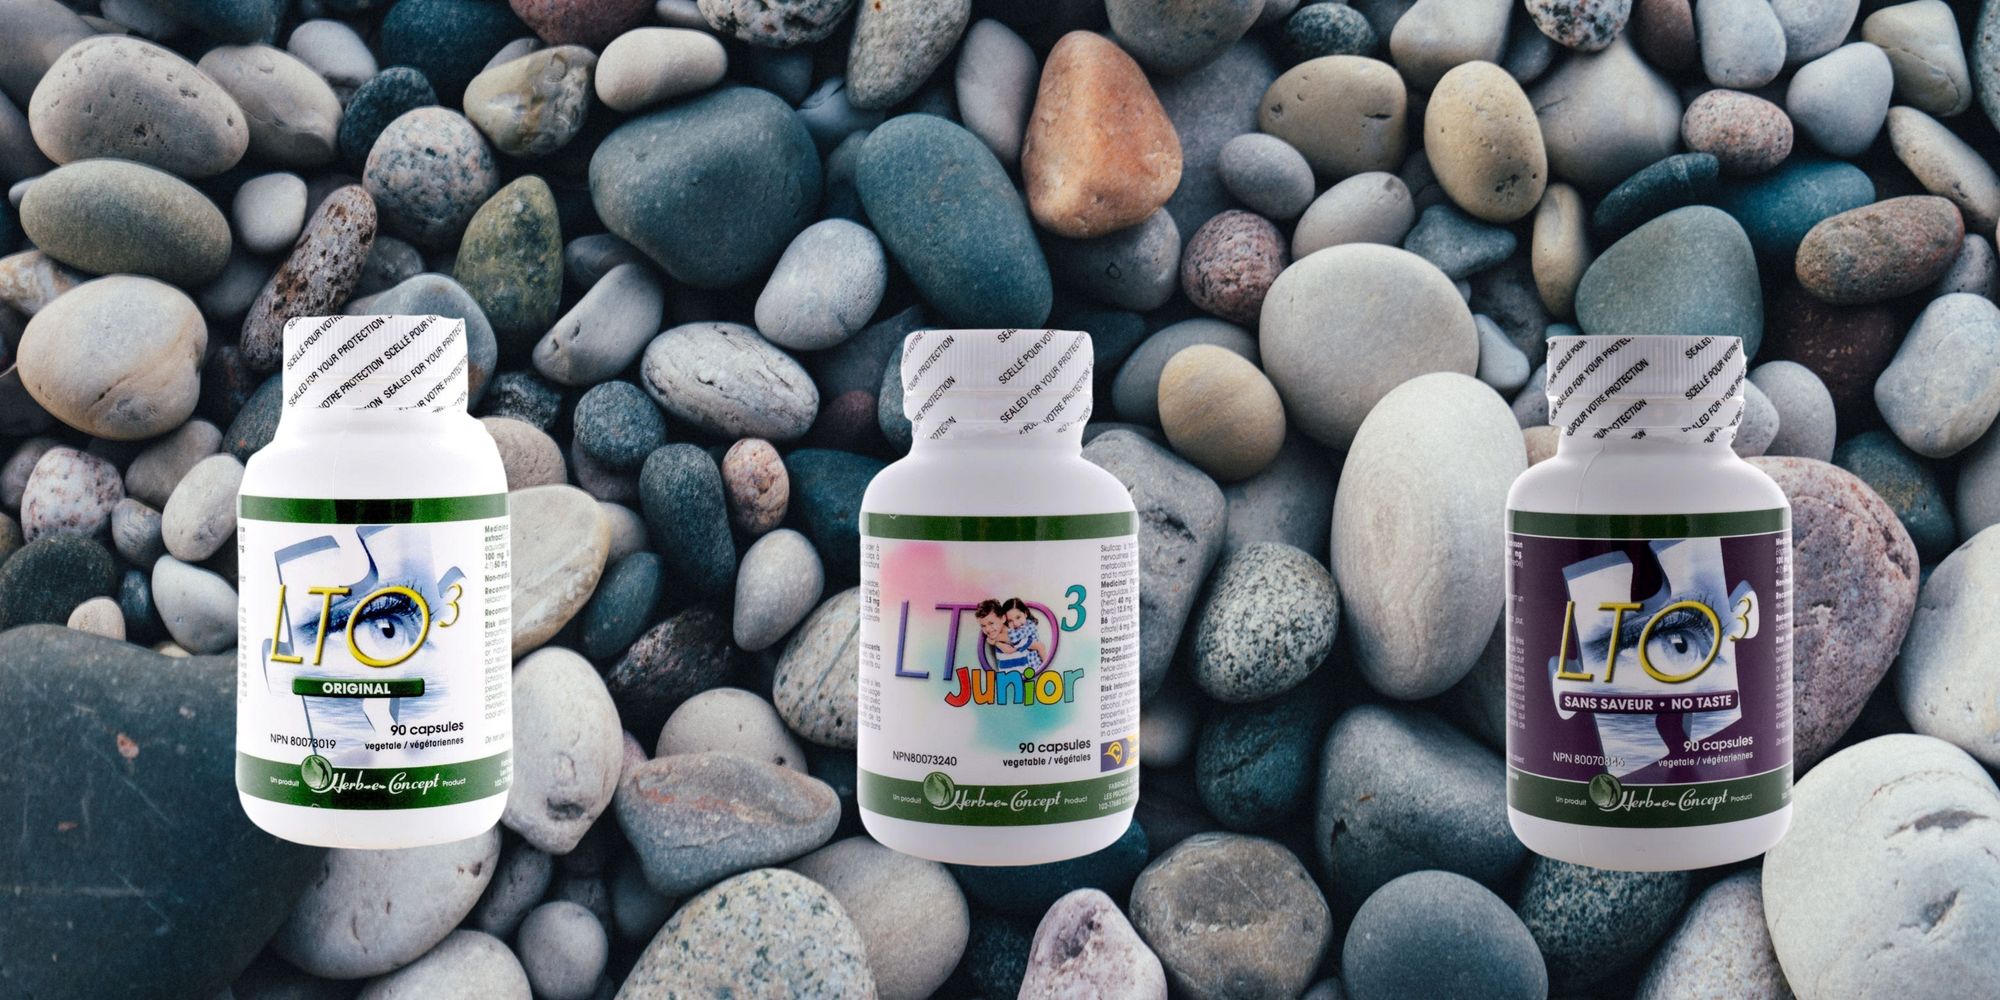 How can LTO3 help fight anxiety and increase concentration?